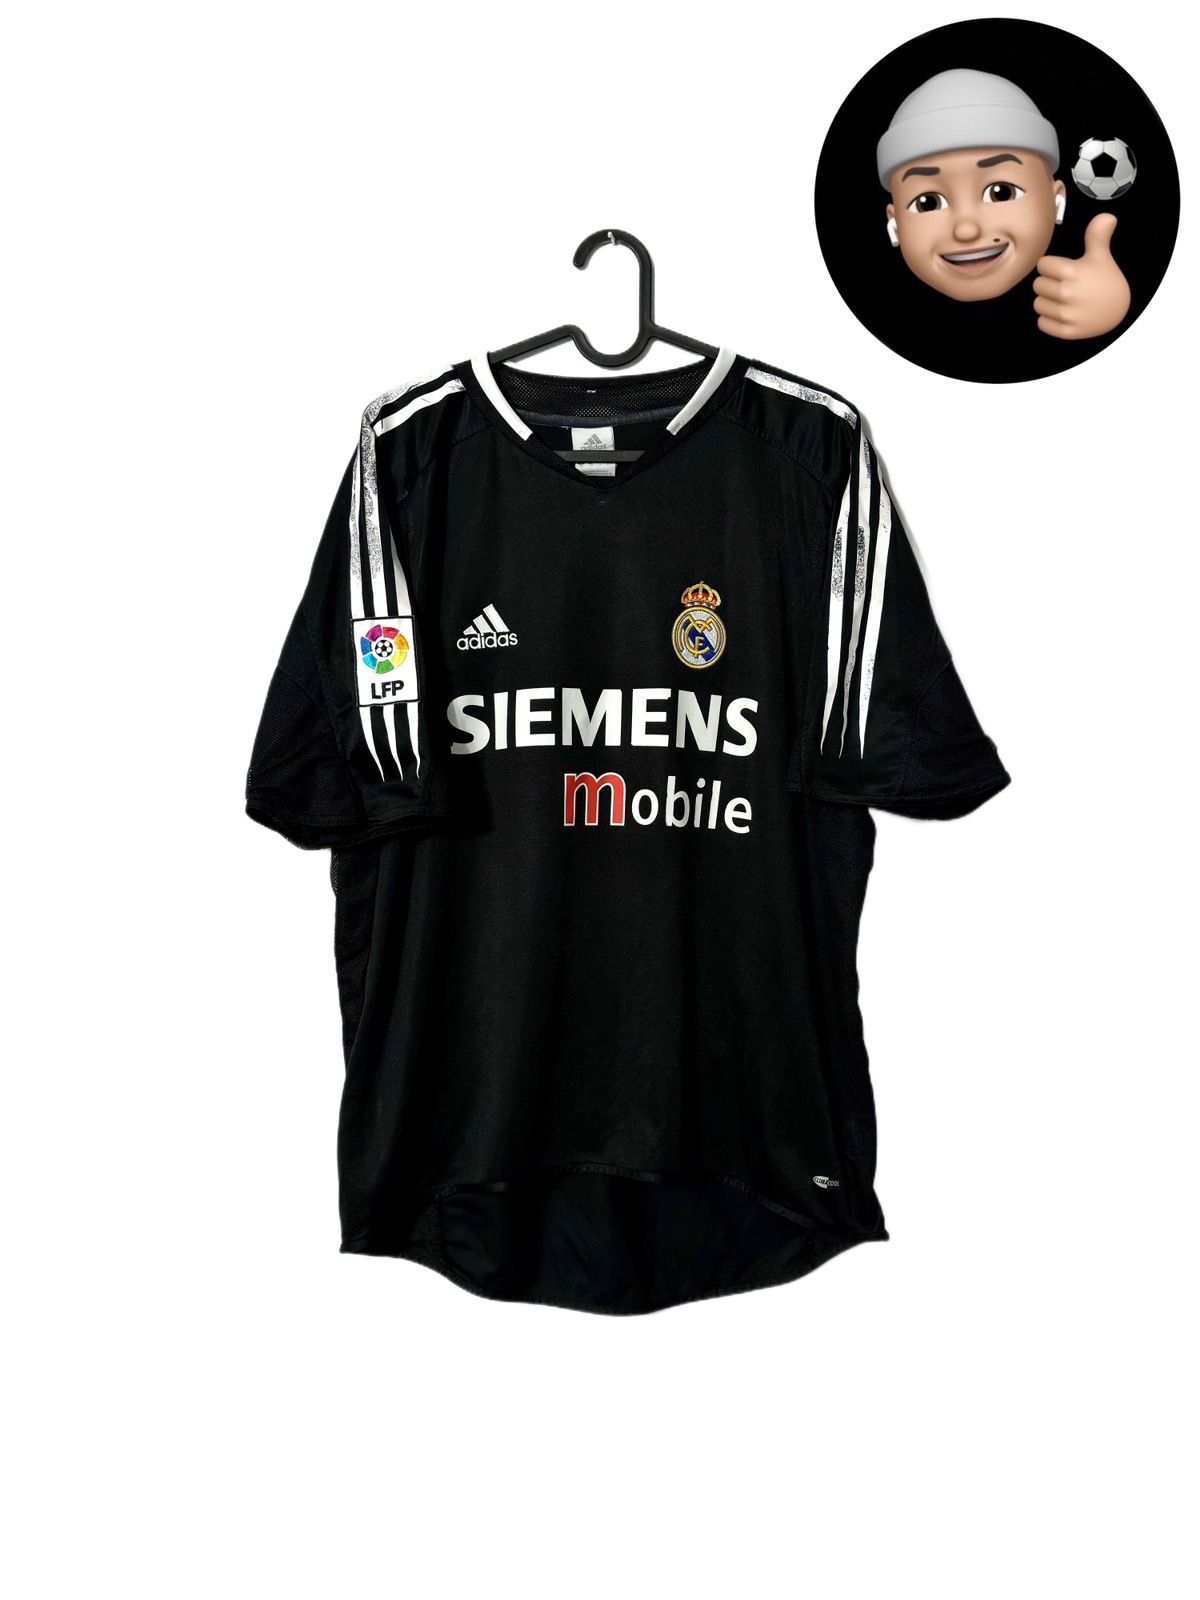 Pre-owned Adidas X Soccer Jersey 2004 2005 Real Madrid Adidas Vintage Away Kit Soccer Jersey In Black